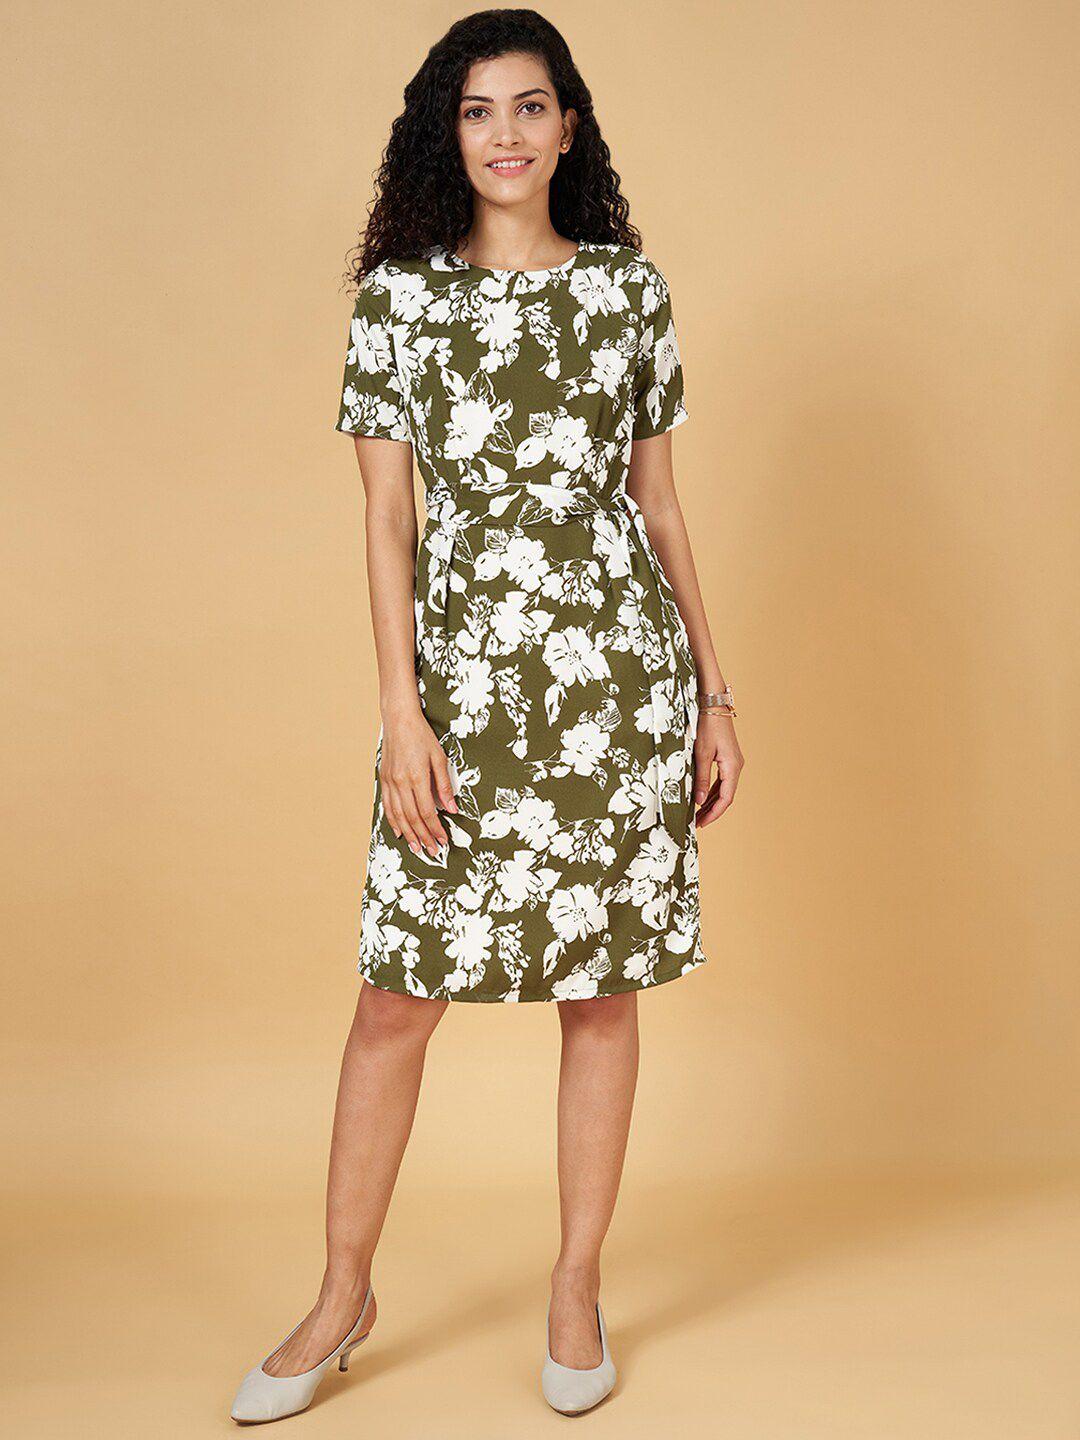 annabelle-by-pantaloons-floral-printed-round-neck-fit-&-flare-dress